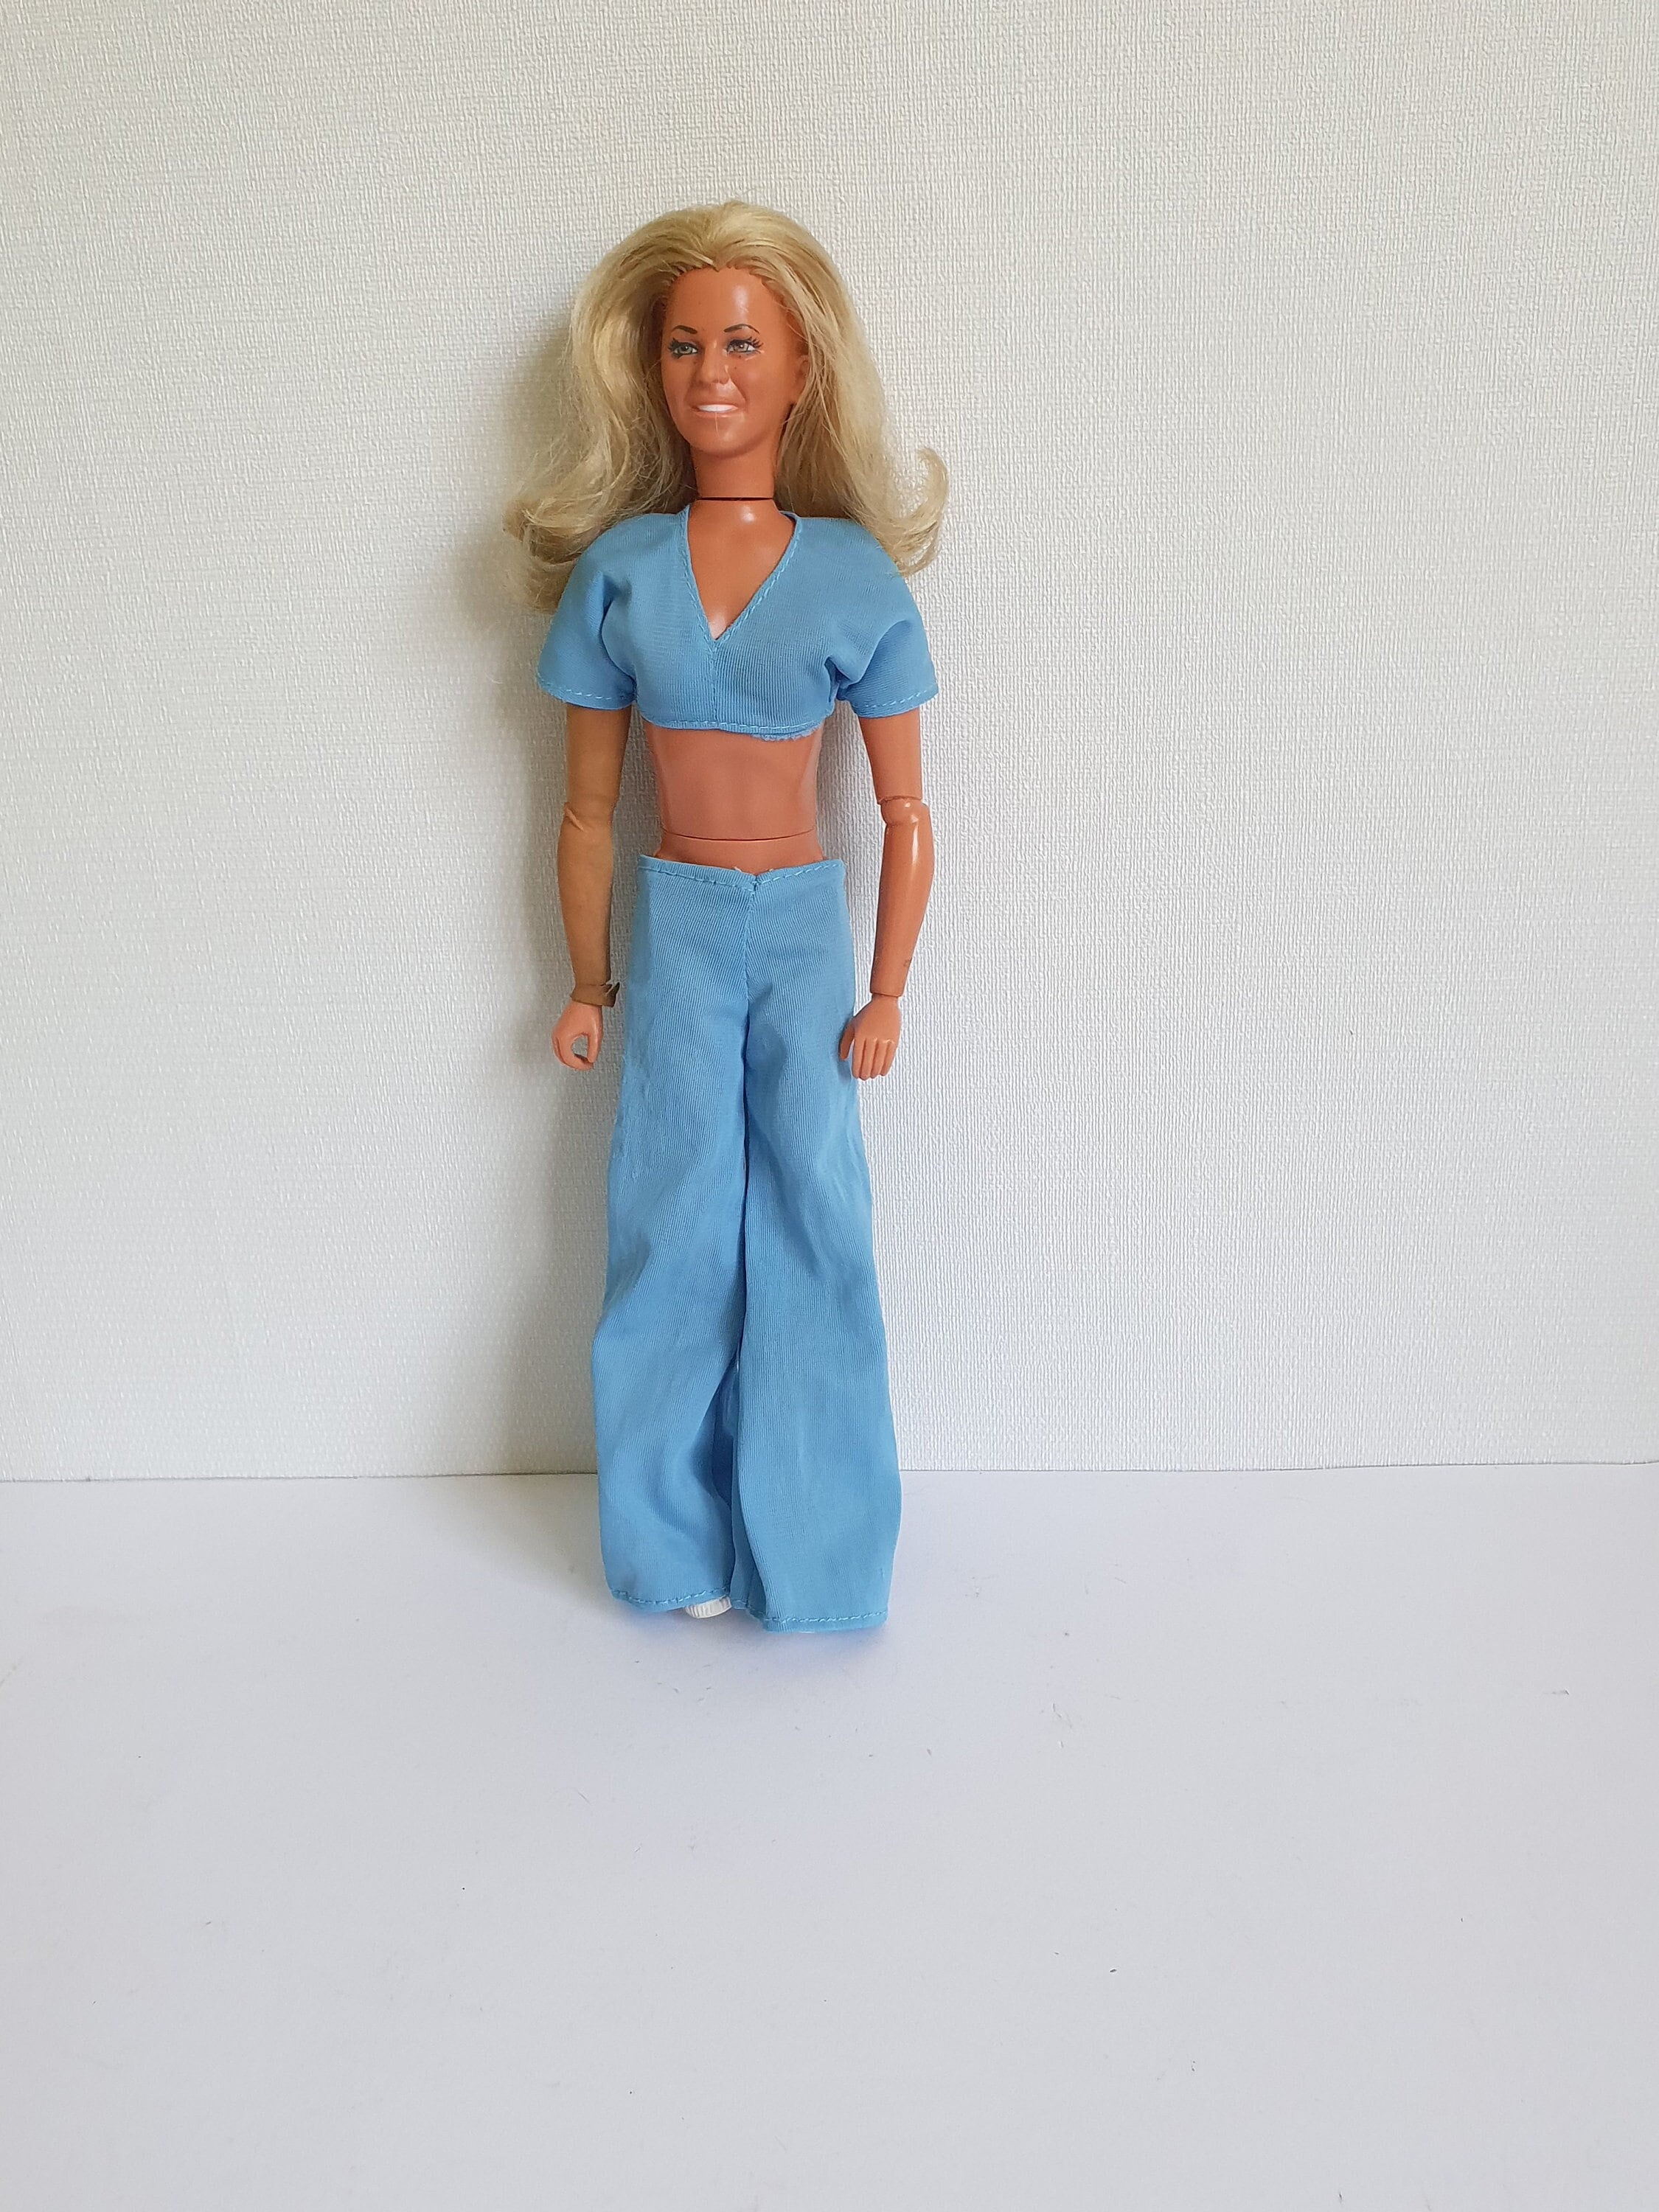 Vintage Kenner Jamie Sommers the Bionic Woman Doll W/ Blue Mist Outfit 1976  